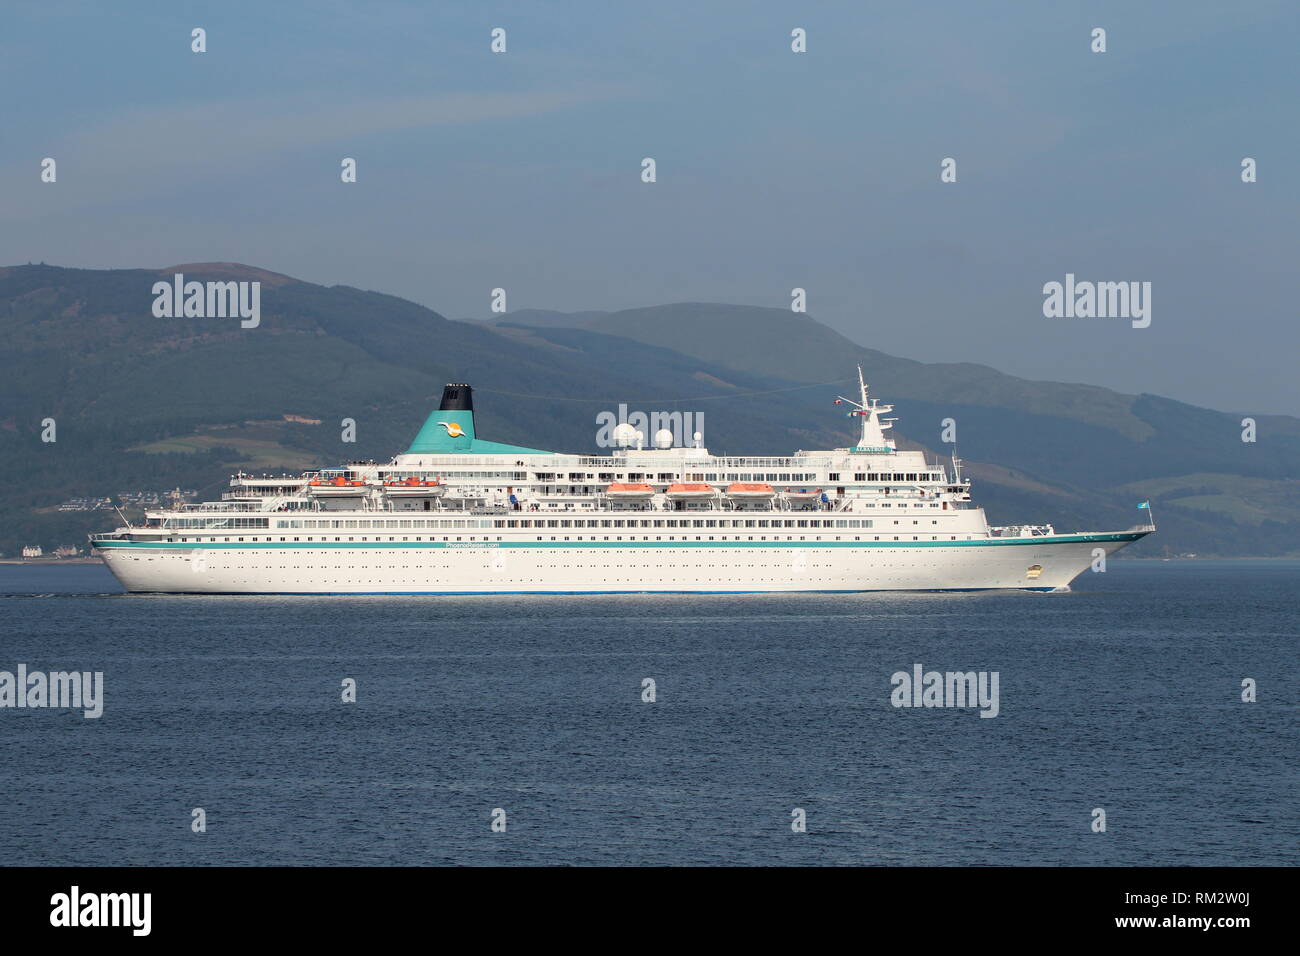 MS Albatros, a cruise ship operated by Phoenix Reisen, passing Gourock on an inbound journey to Greenock on the Firth of Clyde. Stock Photo